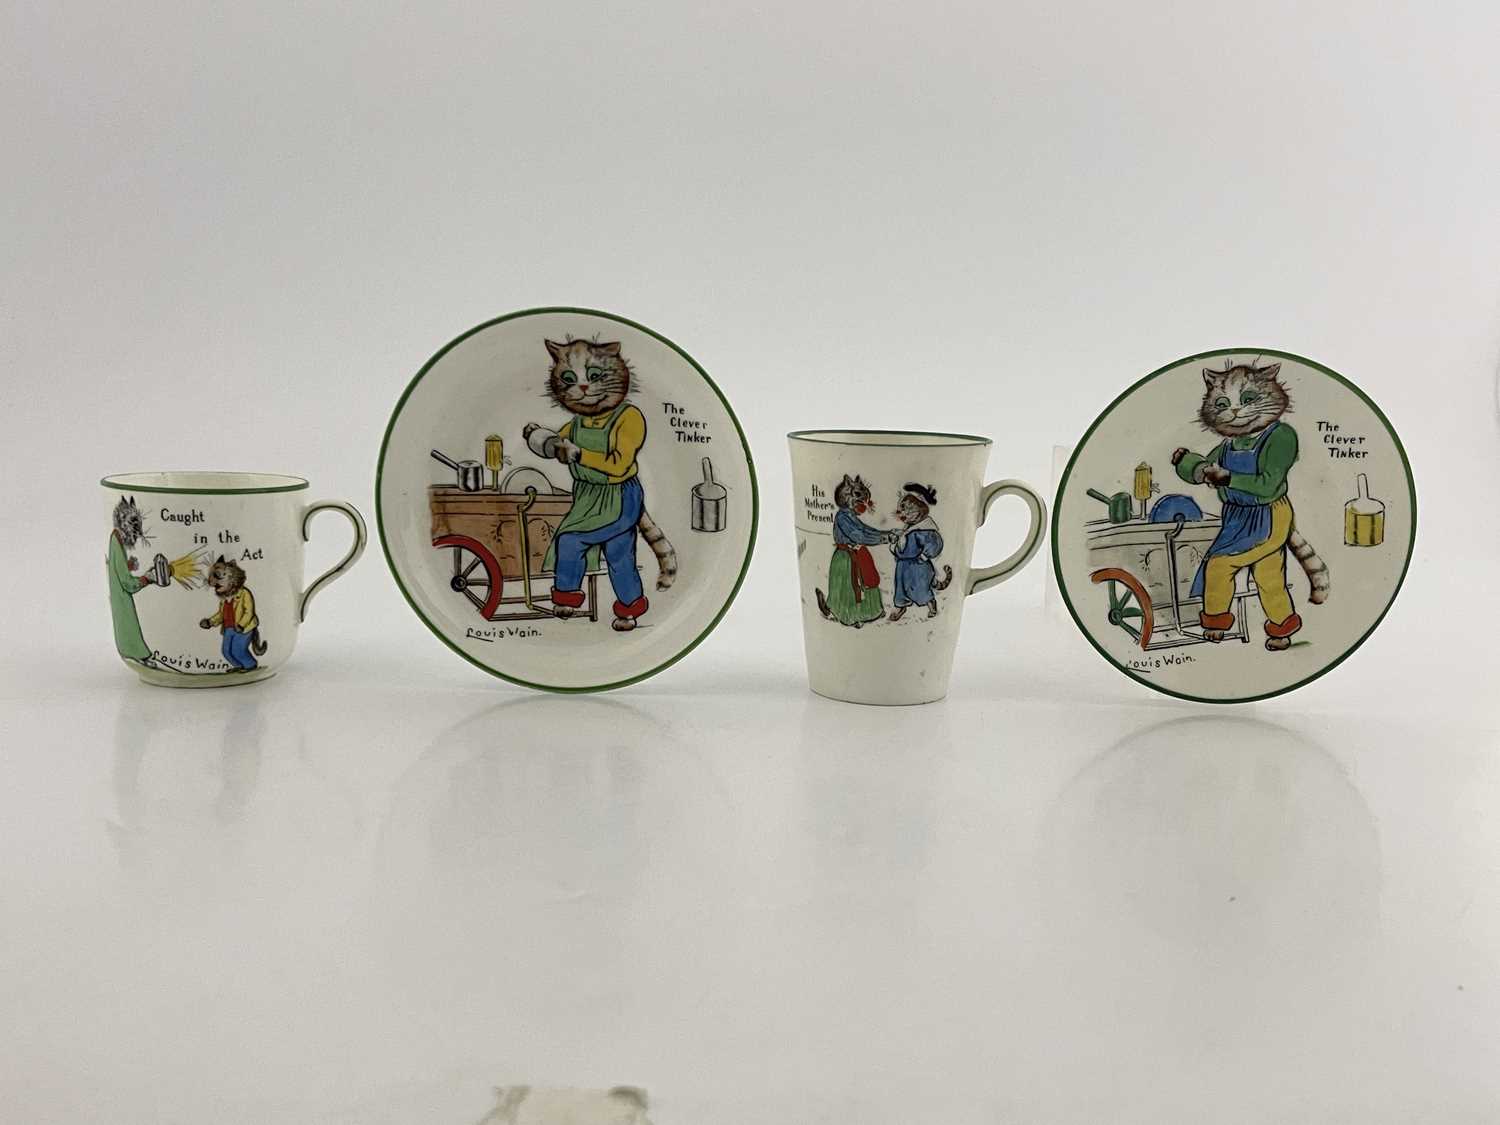 Louis Wain for Paragon China, a cup 'Caught in the Act', a saucer 'The Clever Tinker', a side - Image 2 of 5